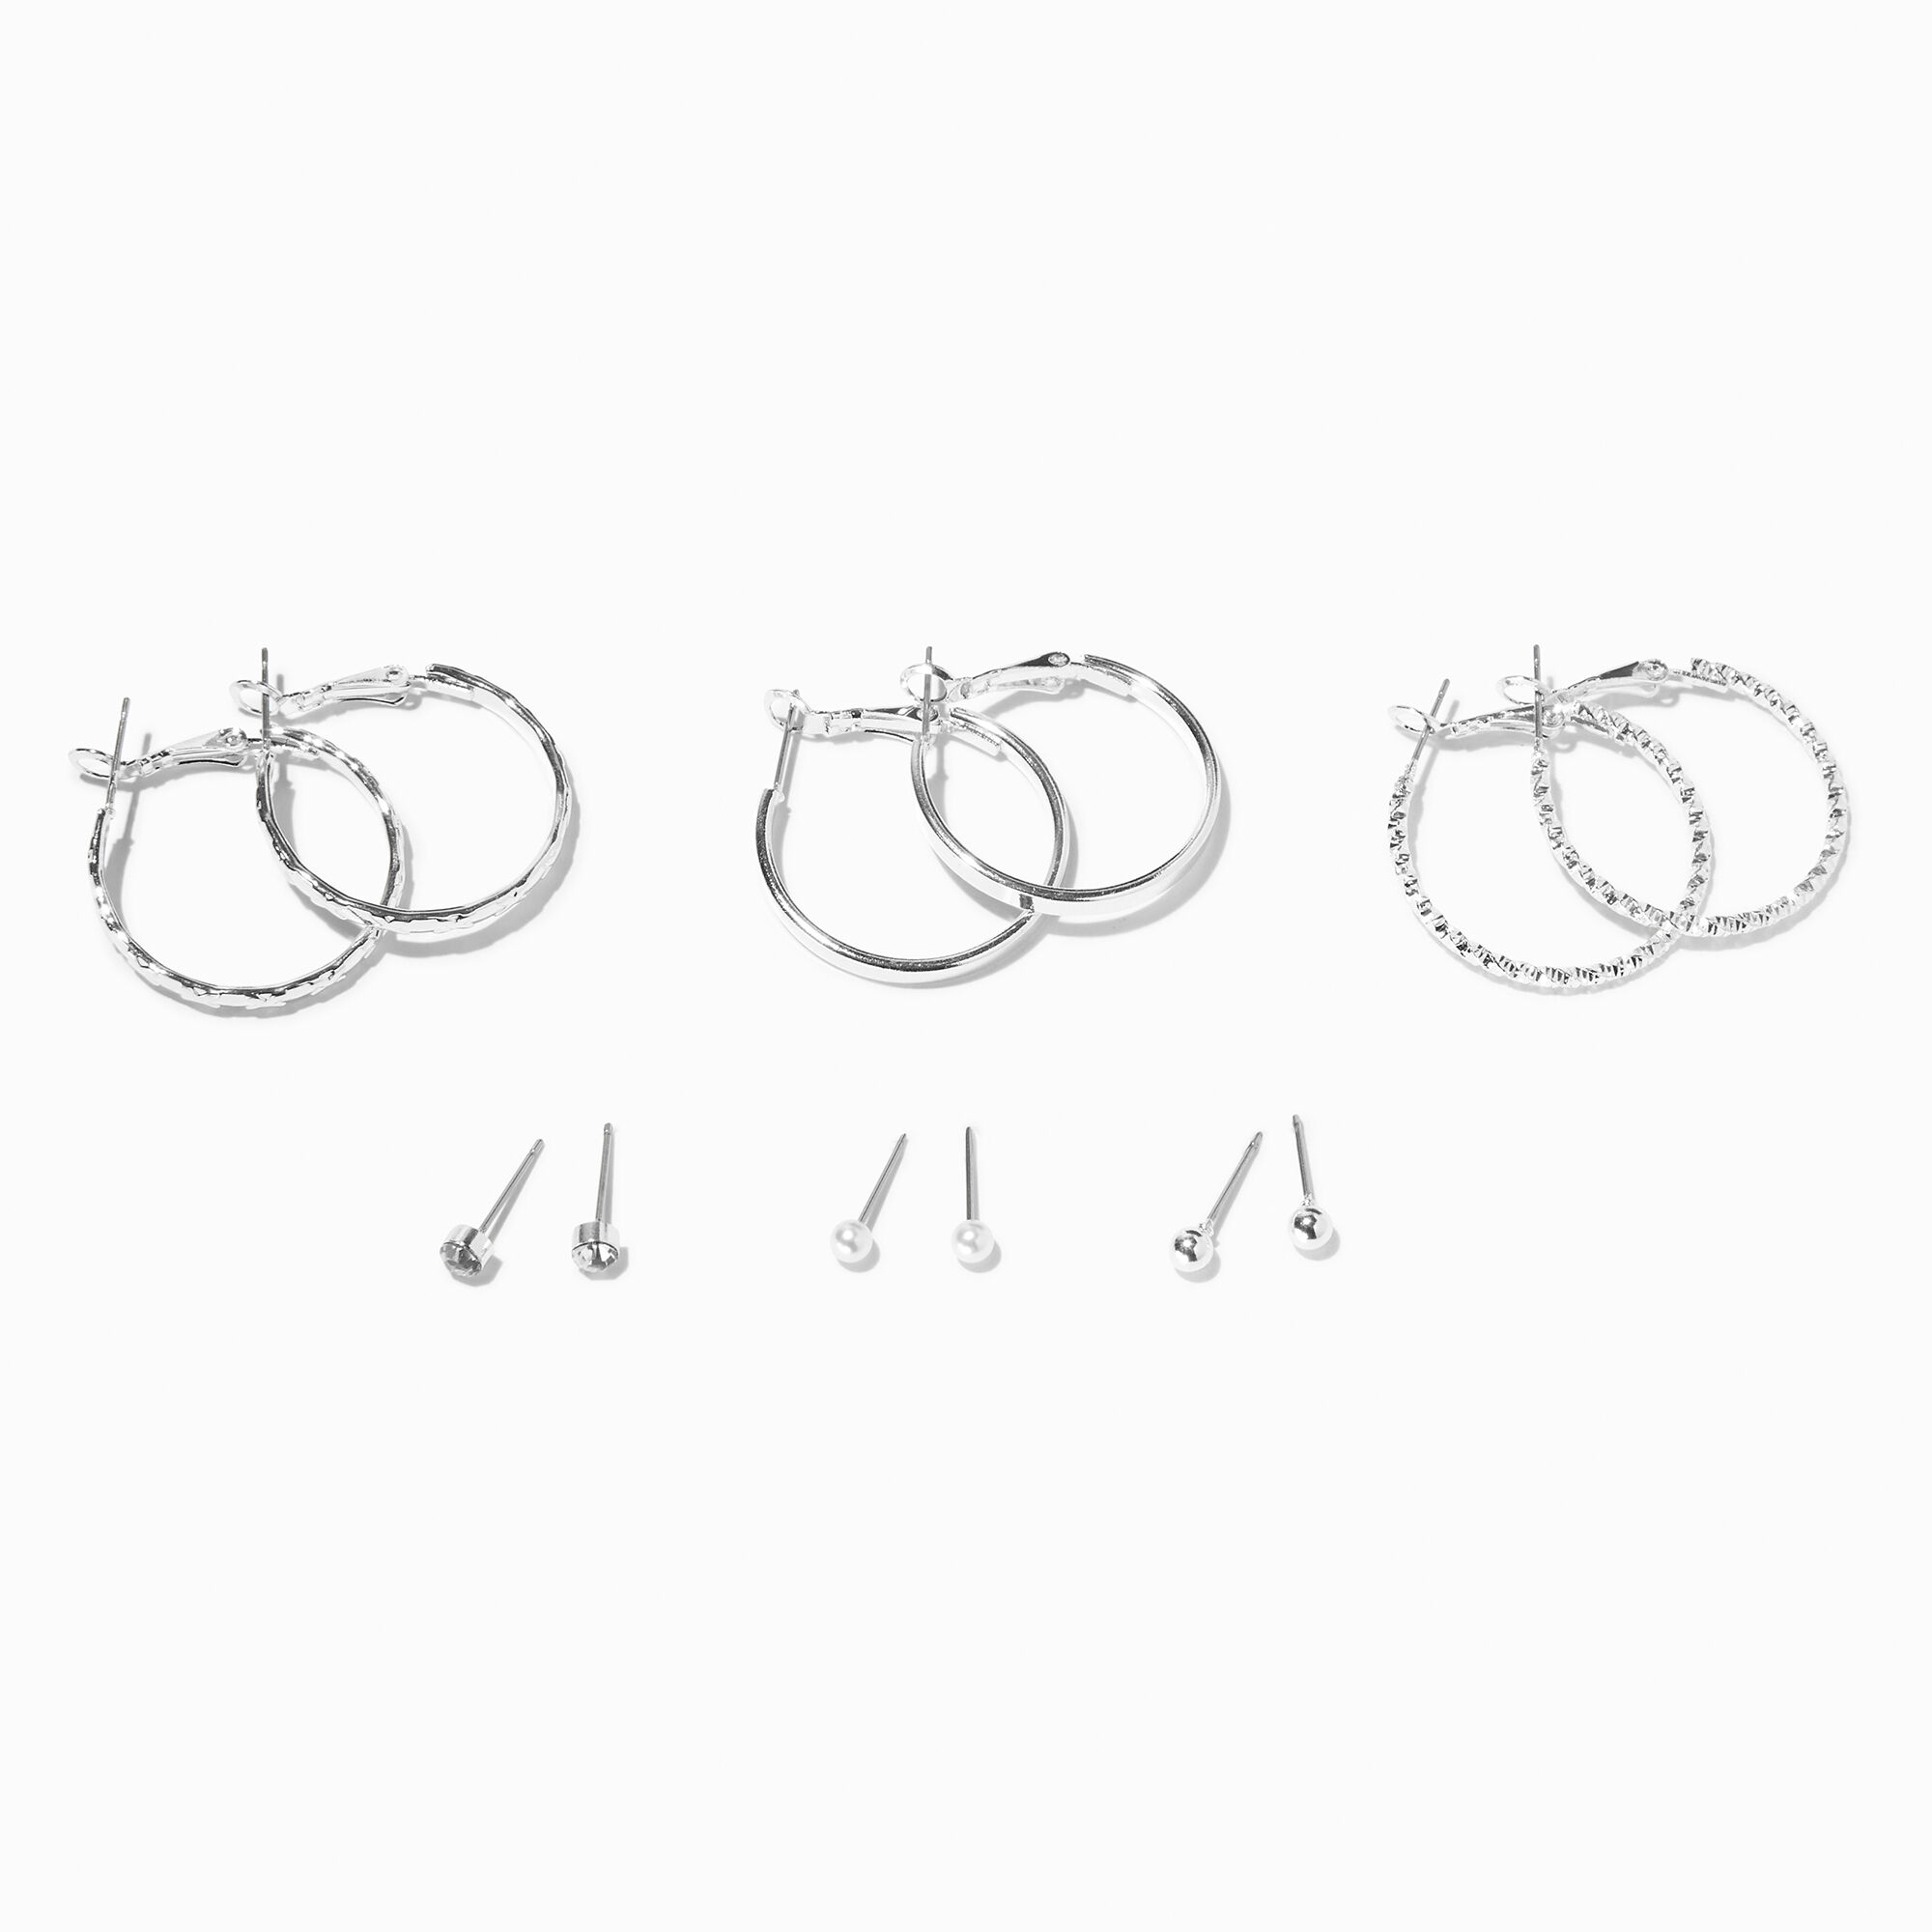 View Claires Textured Hoop Studs Earrings Set 6 Pack Silver information